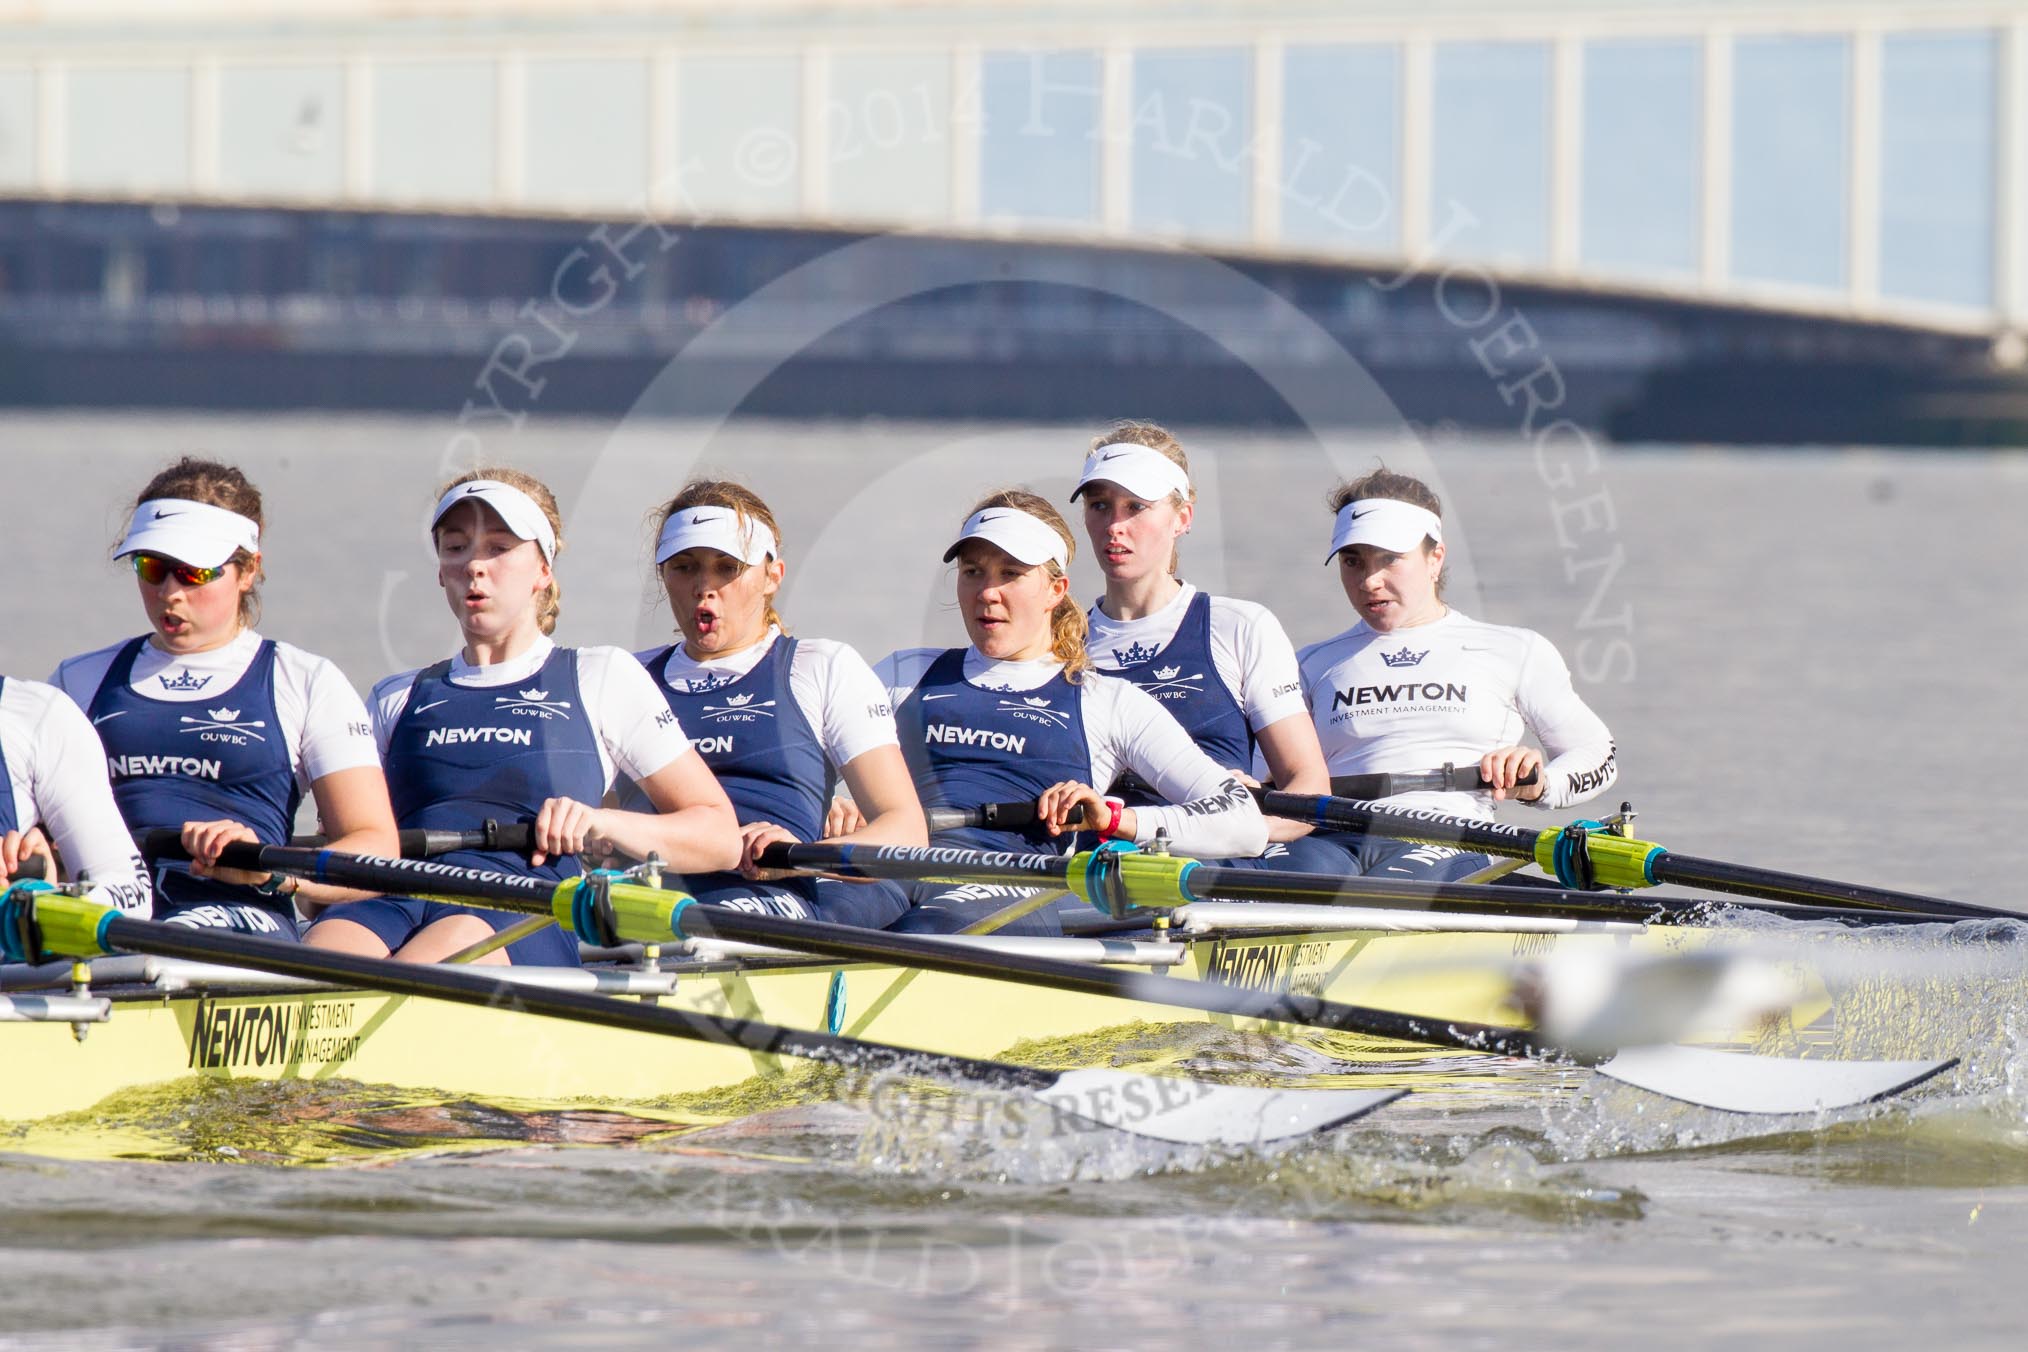 The Boat Race season 2014 - fixture OUWBC vs Molesey BC.




on 01 March 2014 at 13:08, image #172